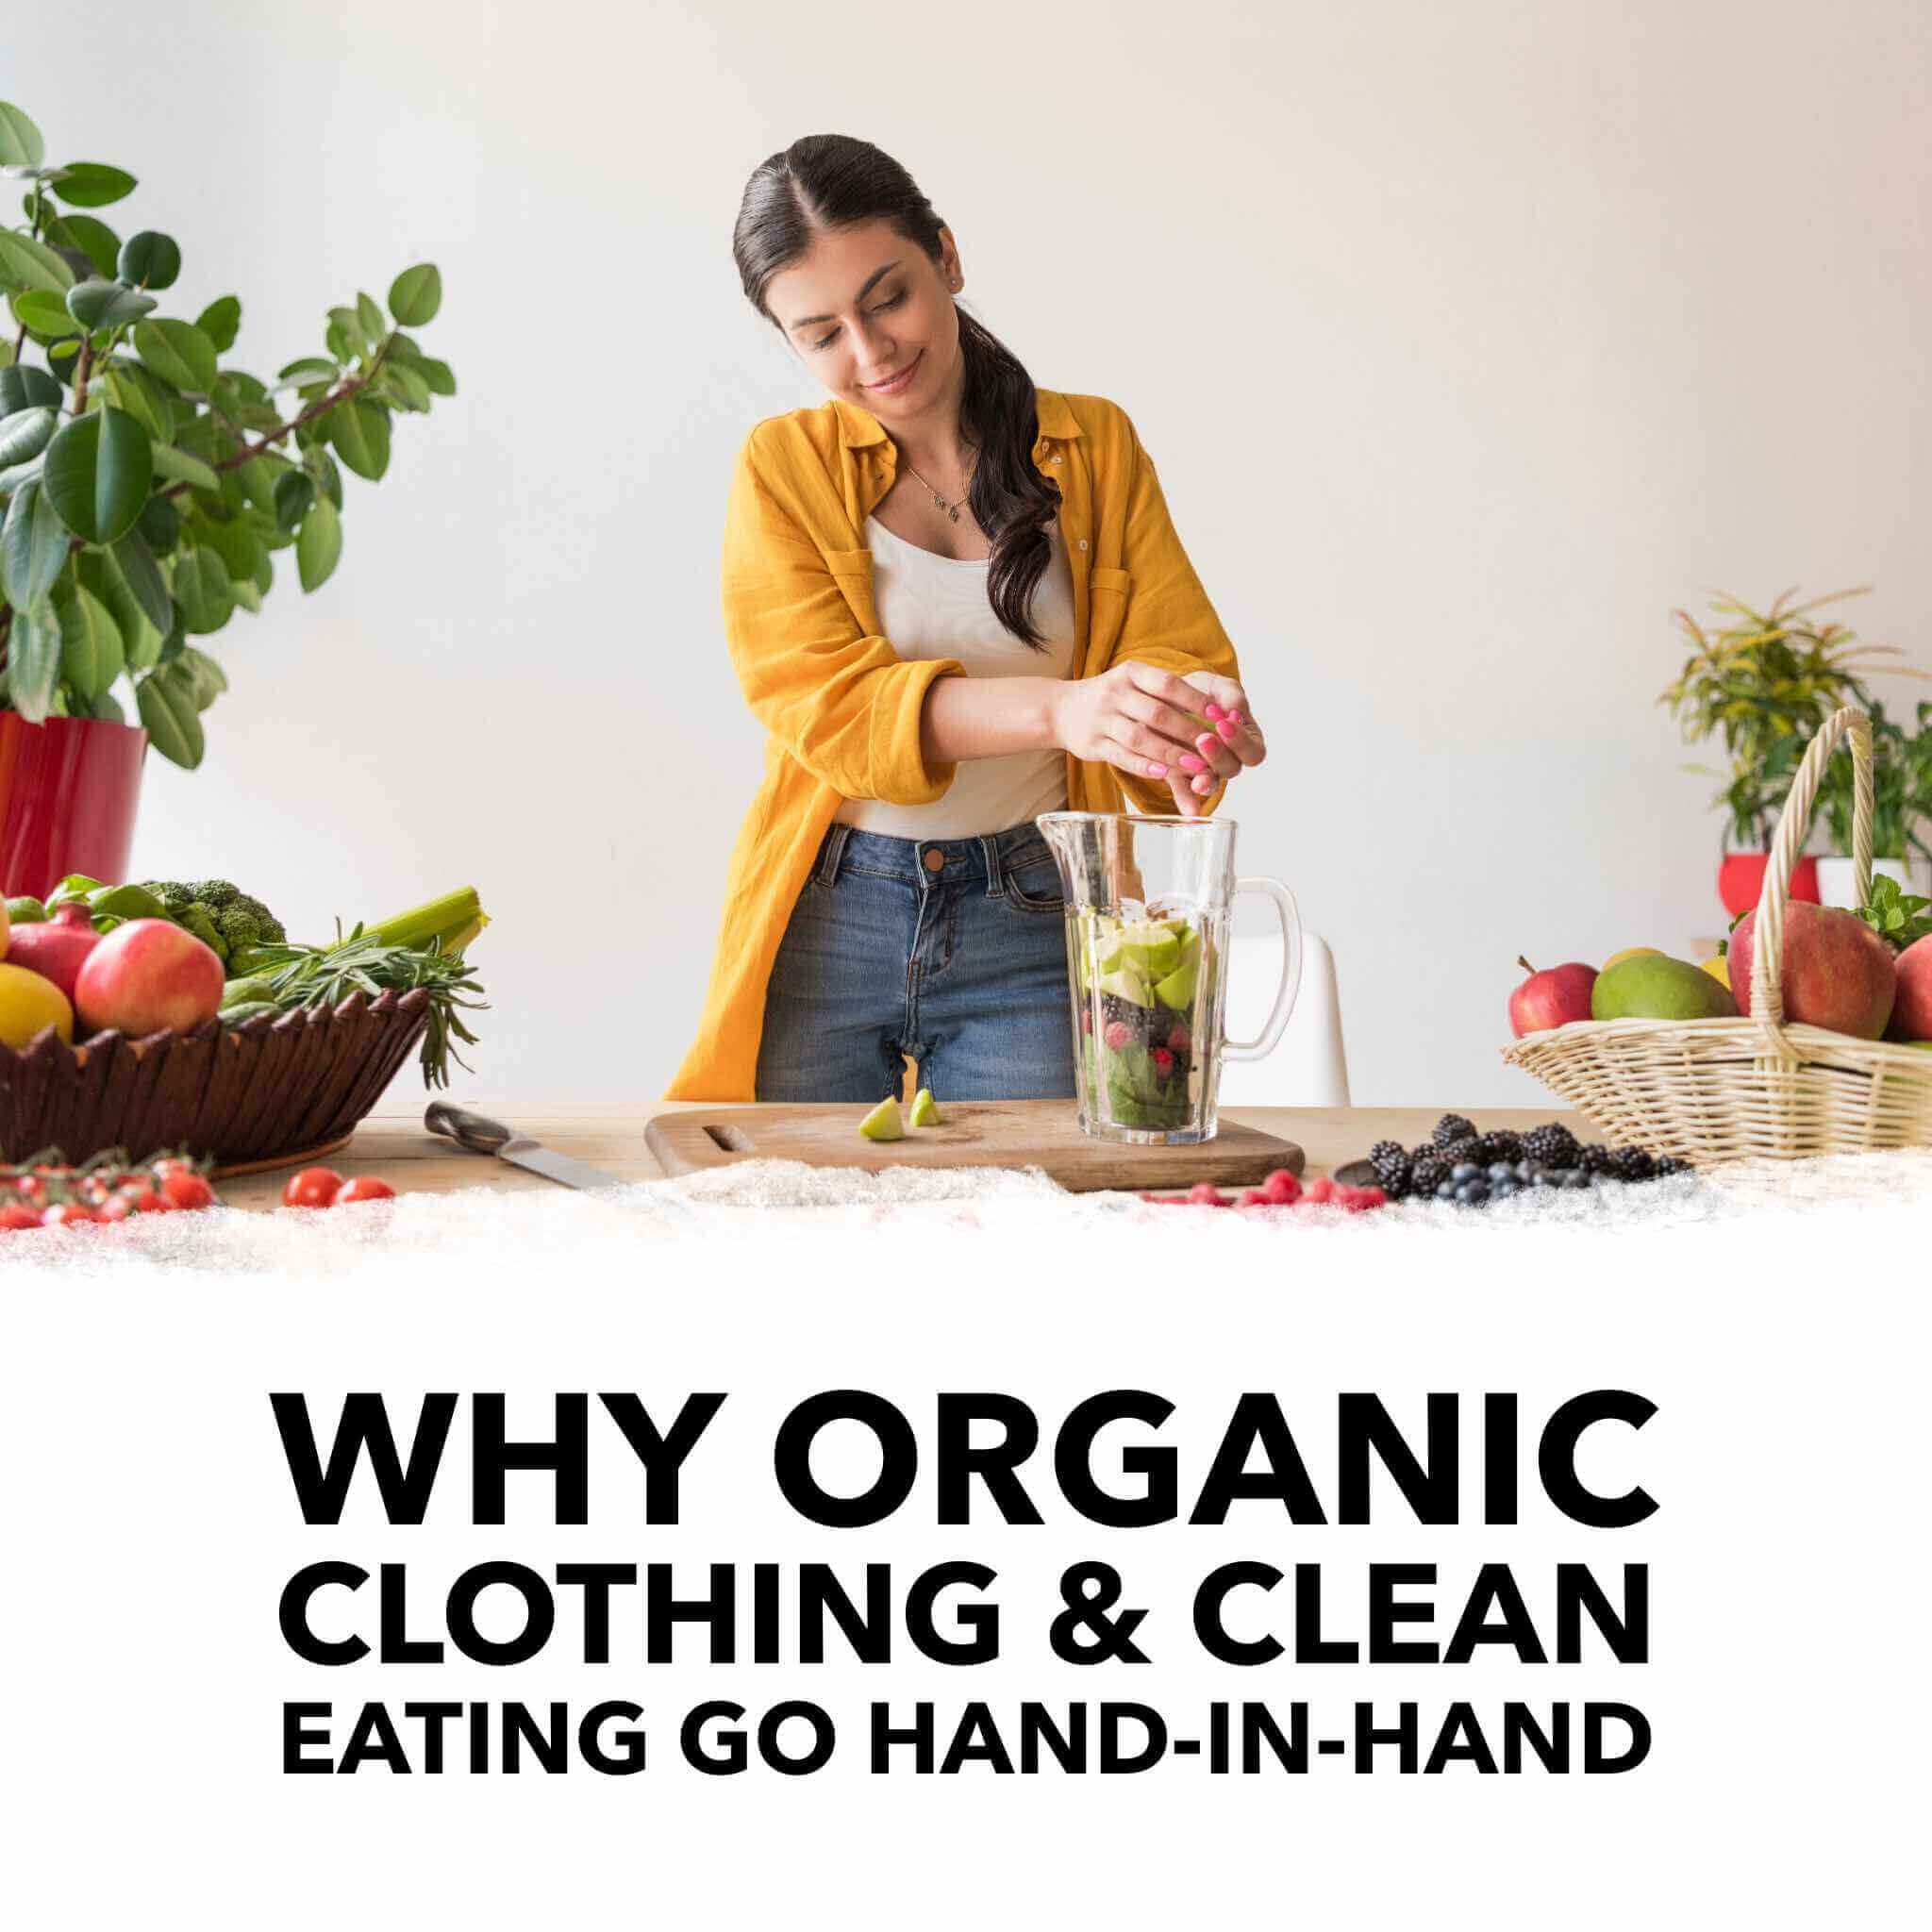 why clean eating and organic clothing go together